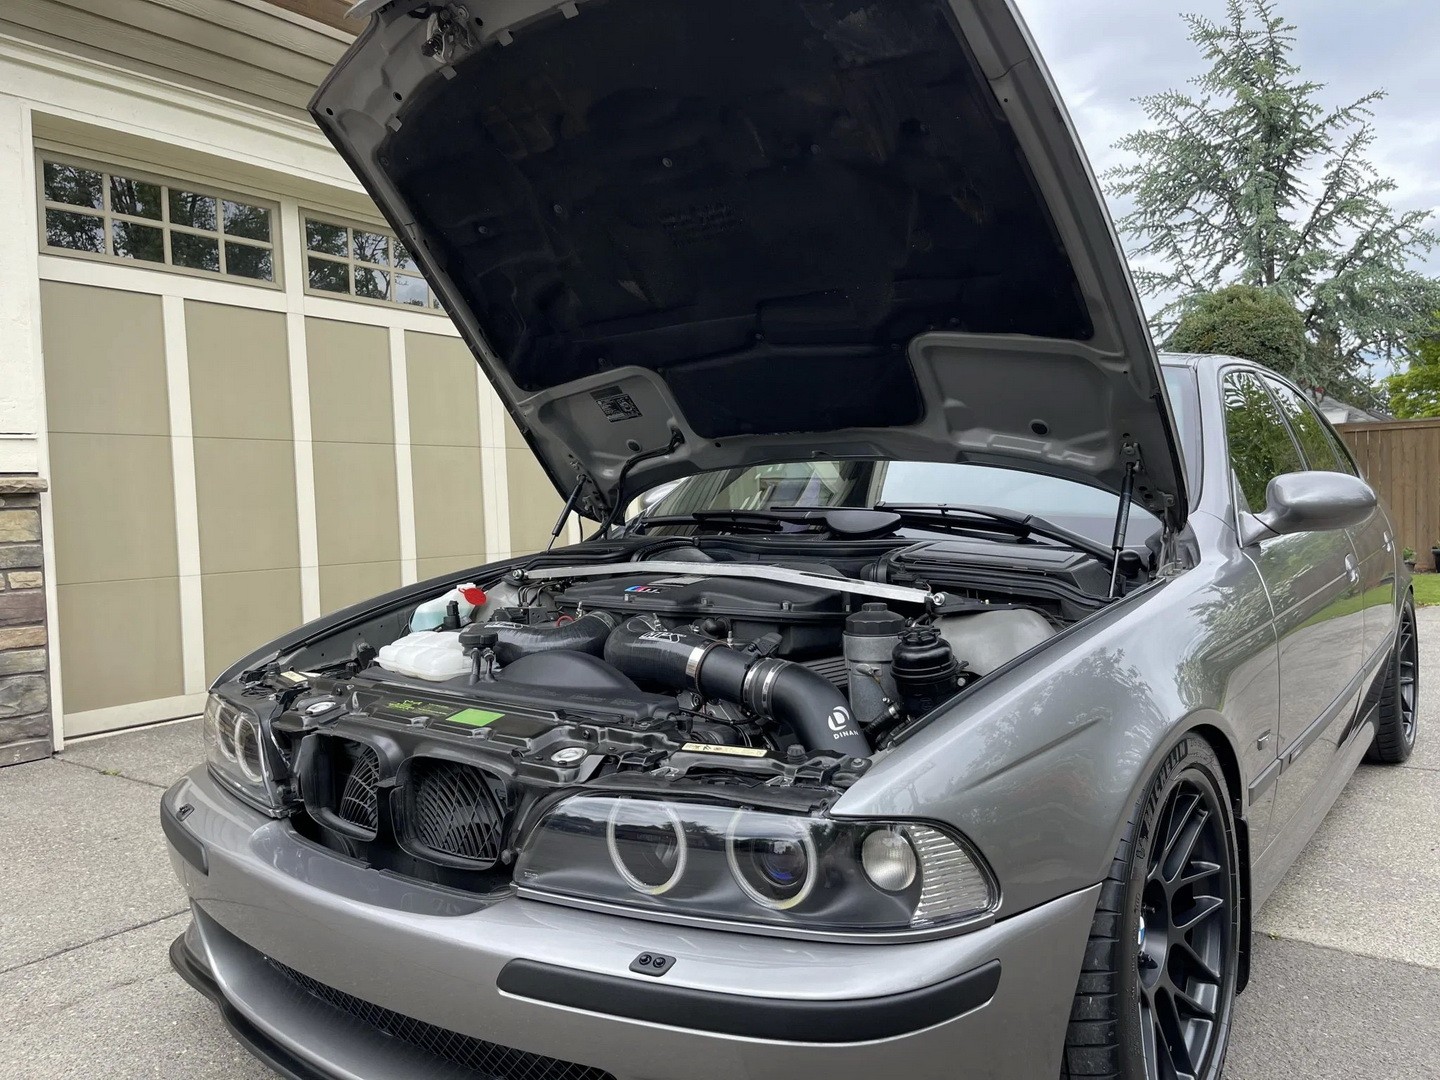 Tuned E39 BMW M5 Up for Grabs With Several Awesome Interior and Exterior  Mods - autoevolution